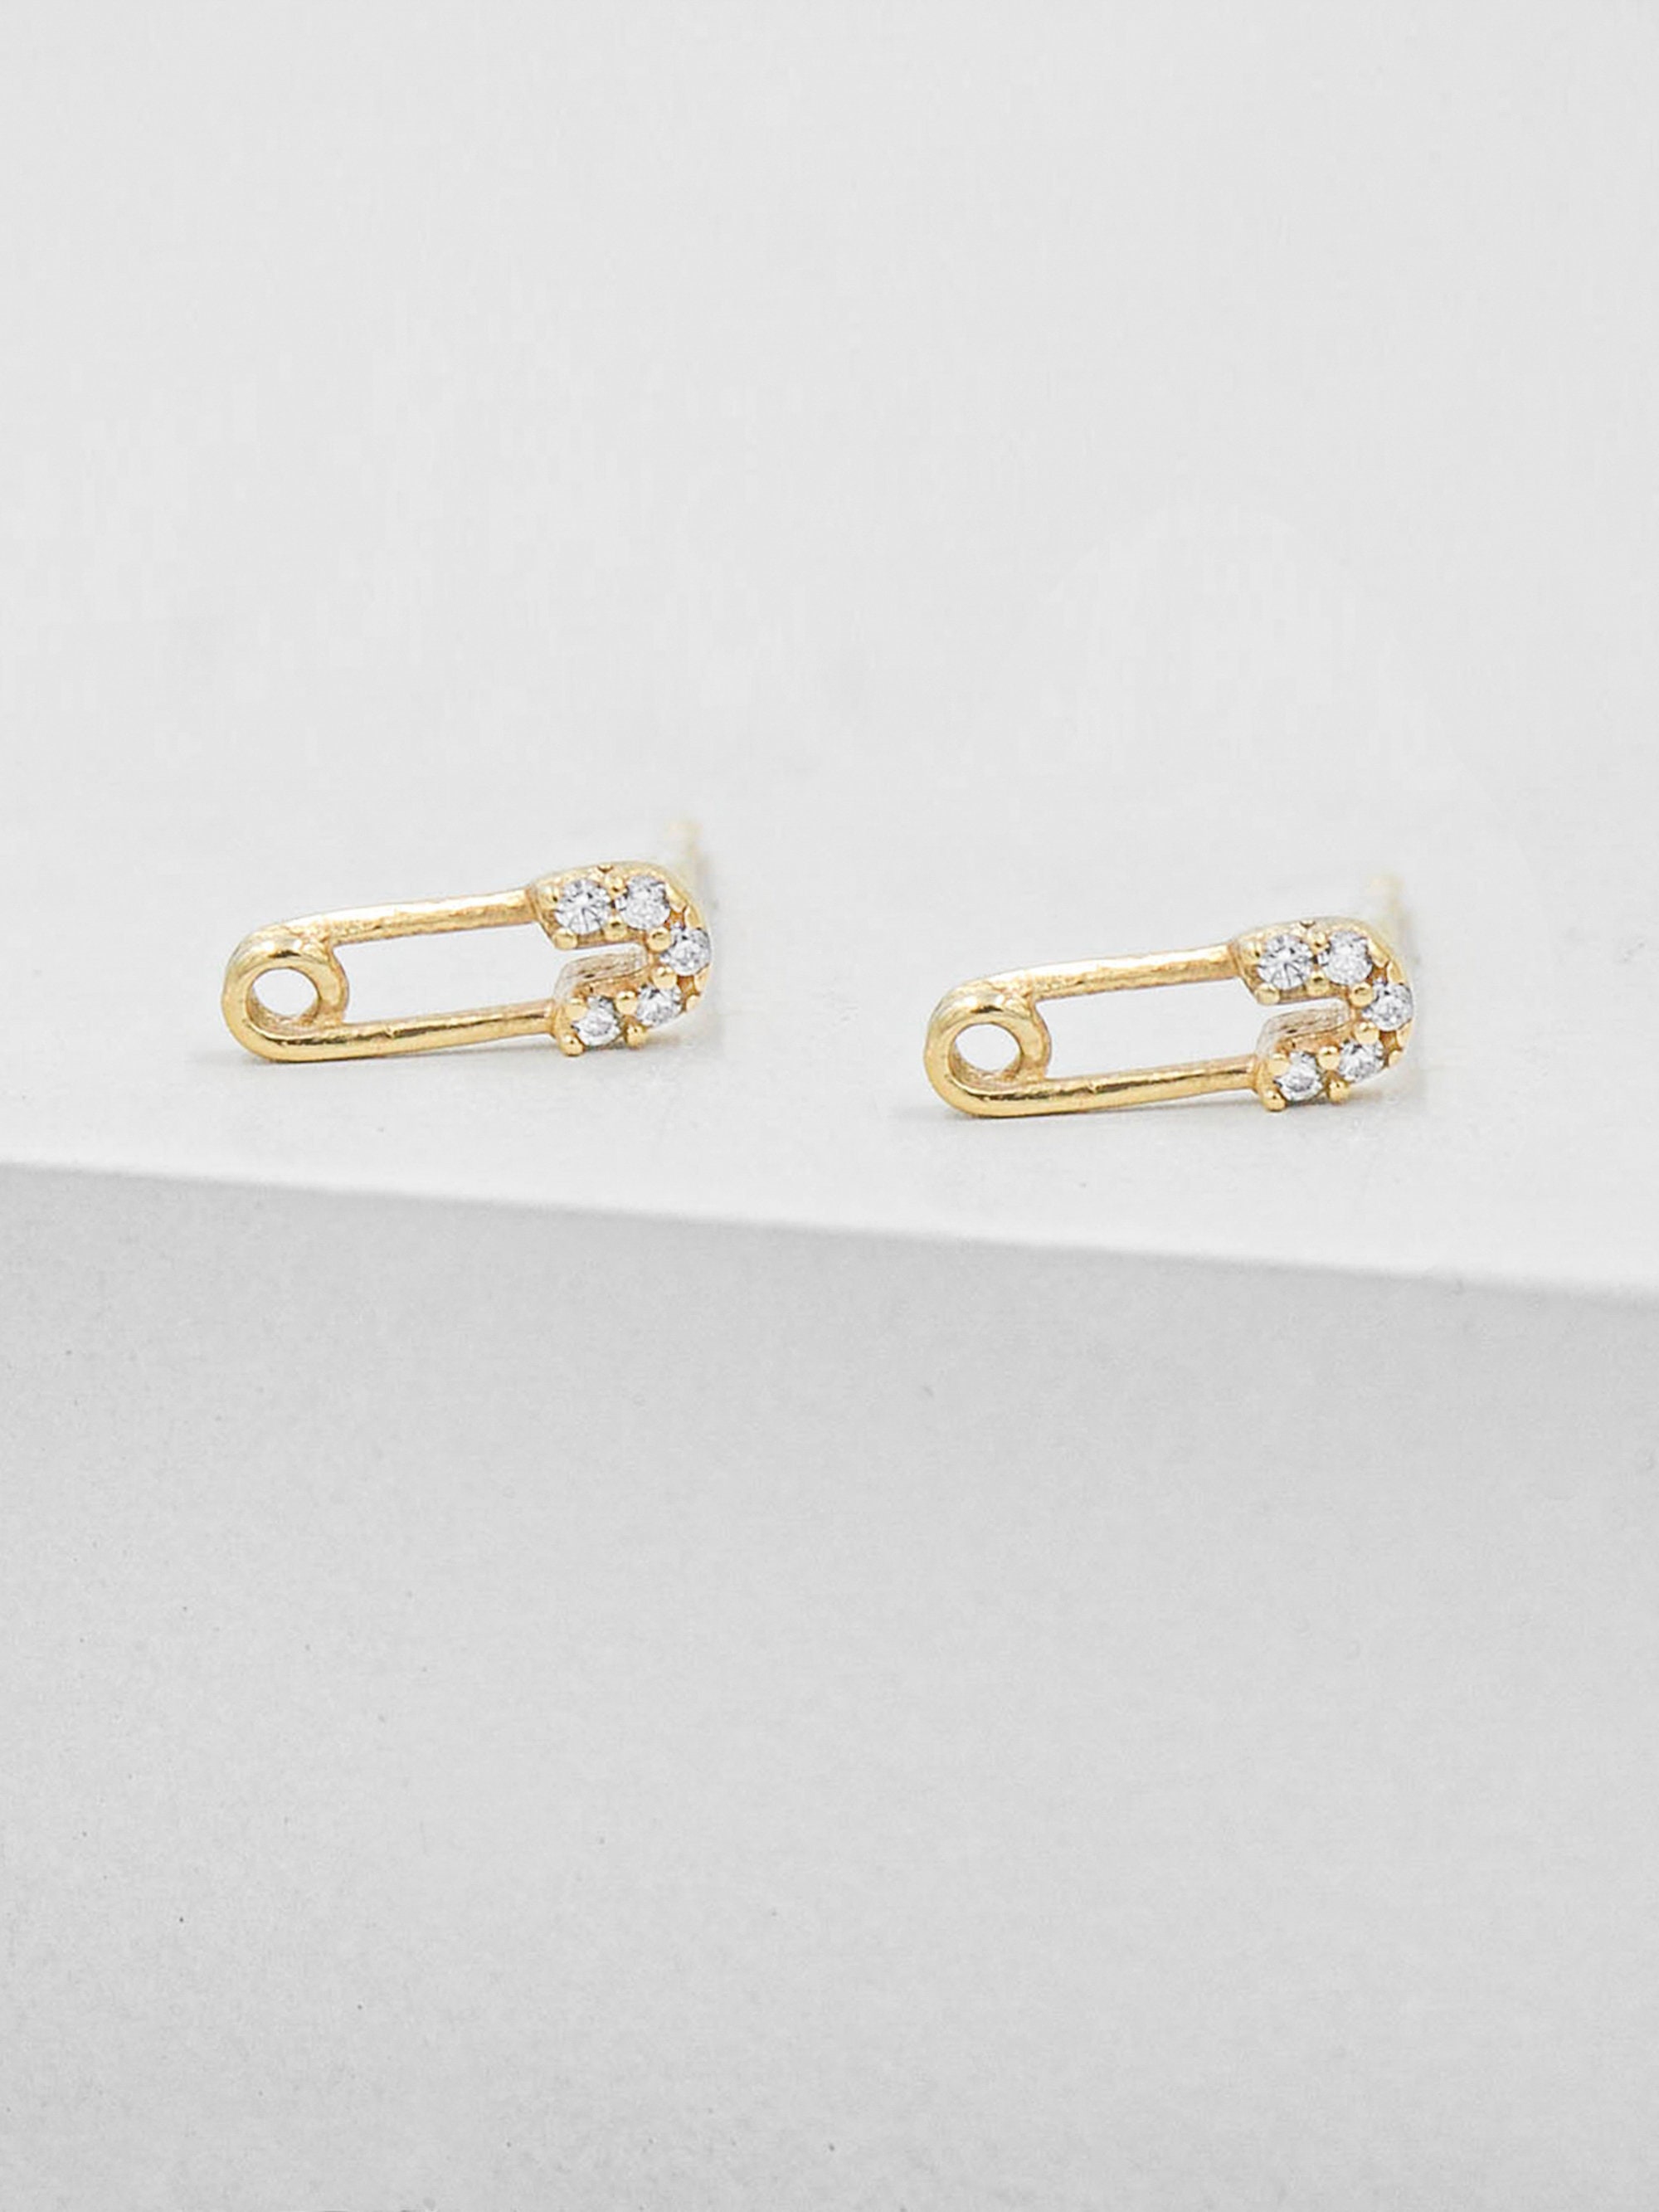 Buy Safety Pin Hoop Earrings 14K Gold Plated Lock Pin Hoop Personalized  Jewelry Gift for Women at Amazon.in